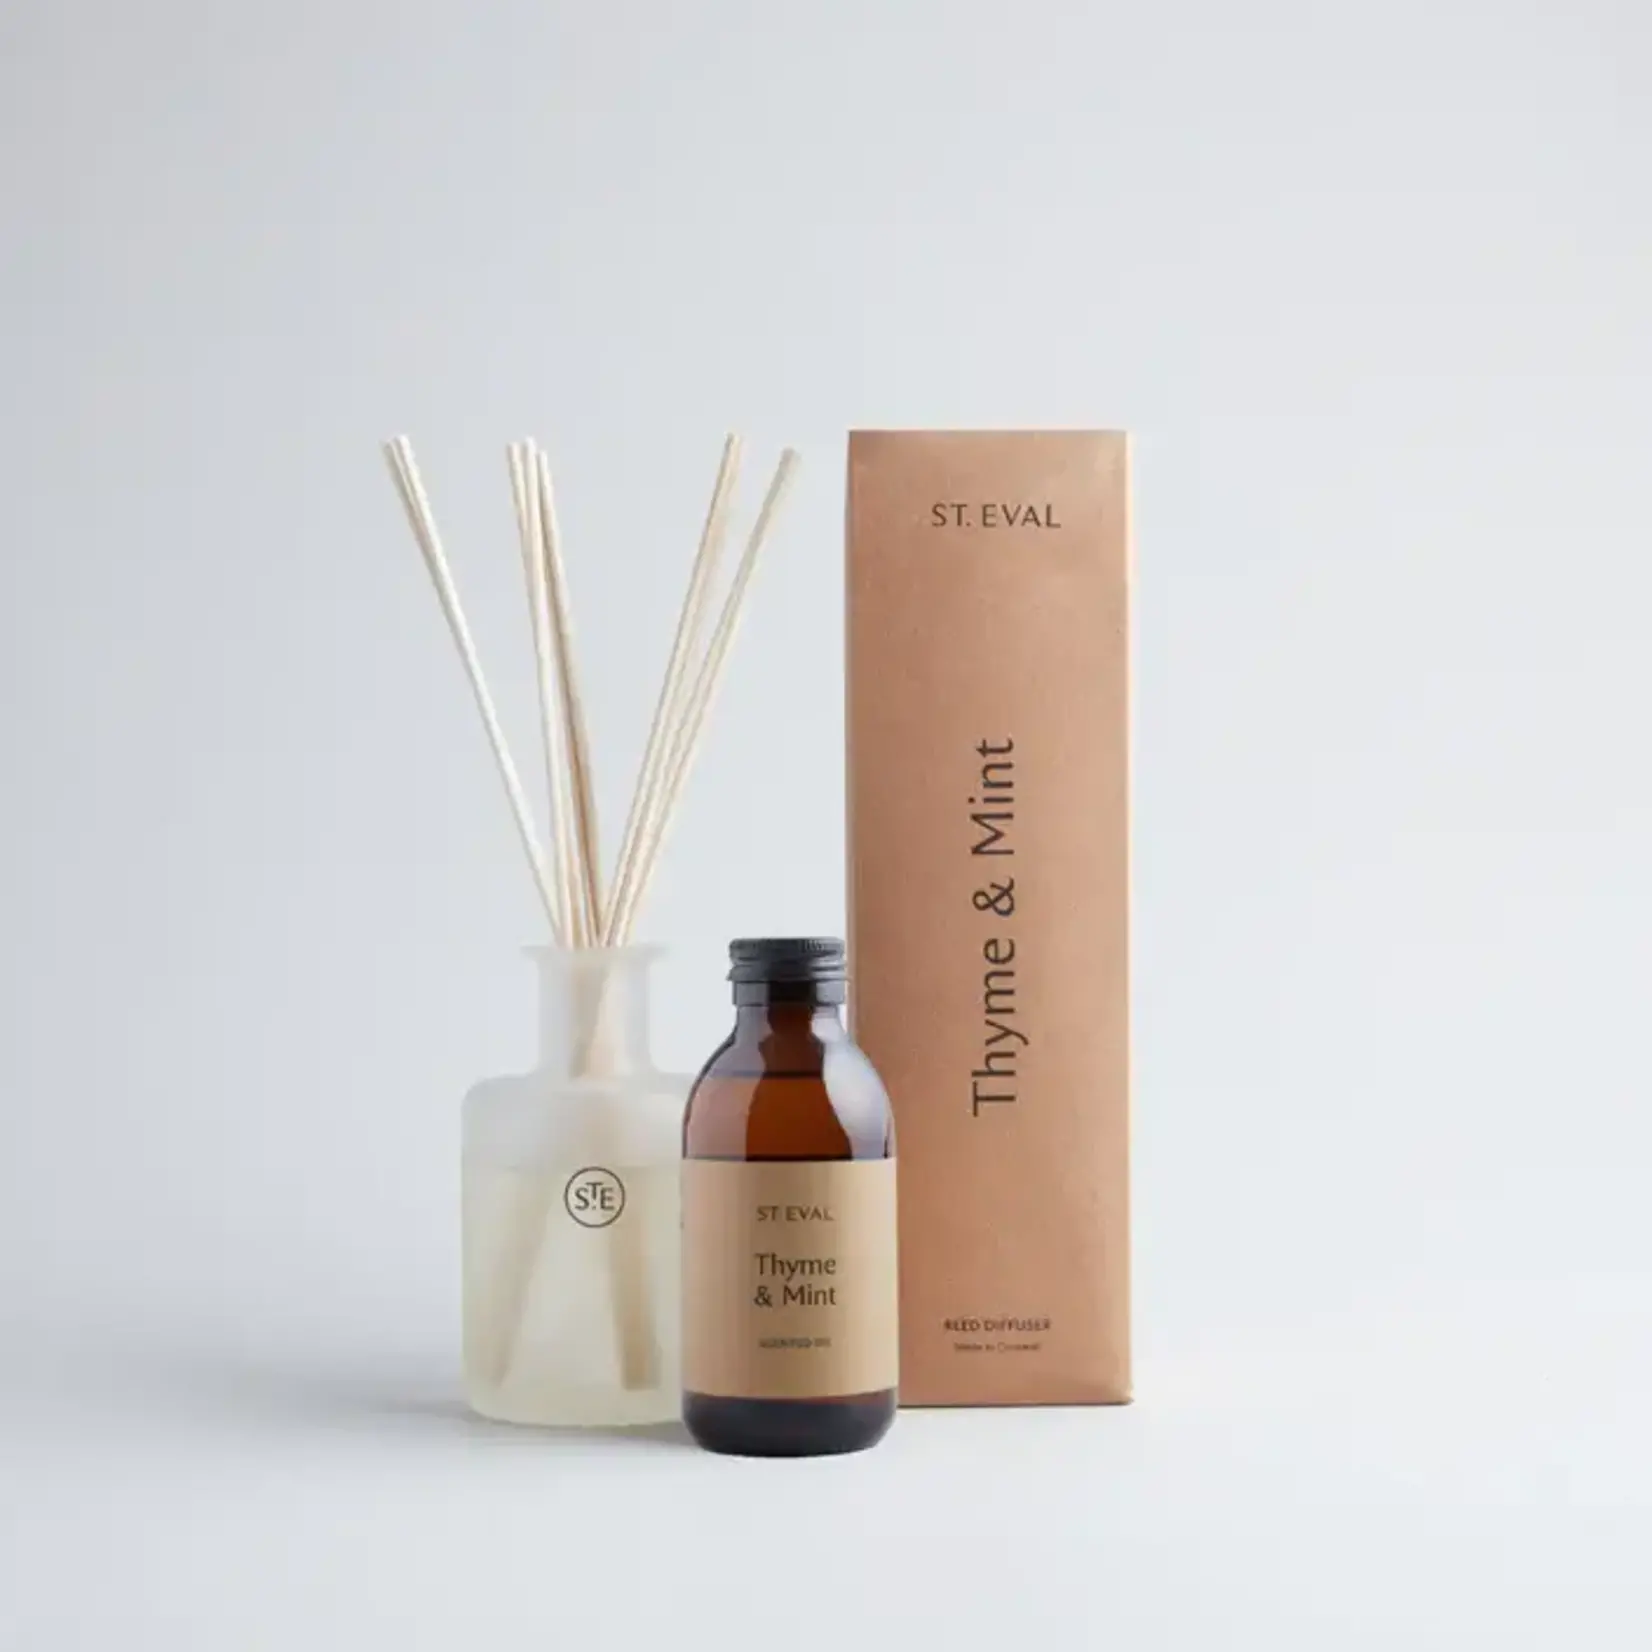 St. Eval St Eval Thyme & Mint Reed Diffuser